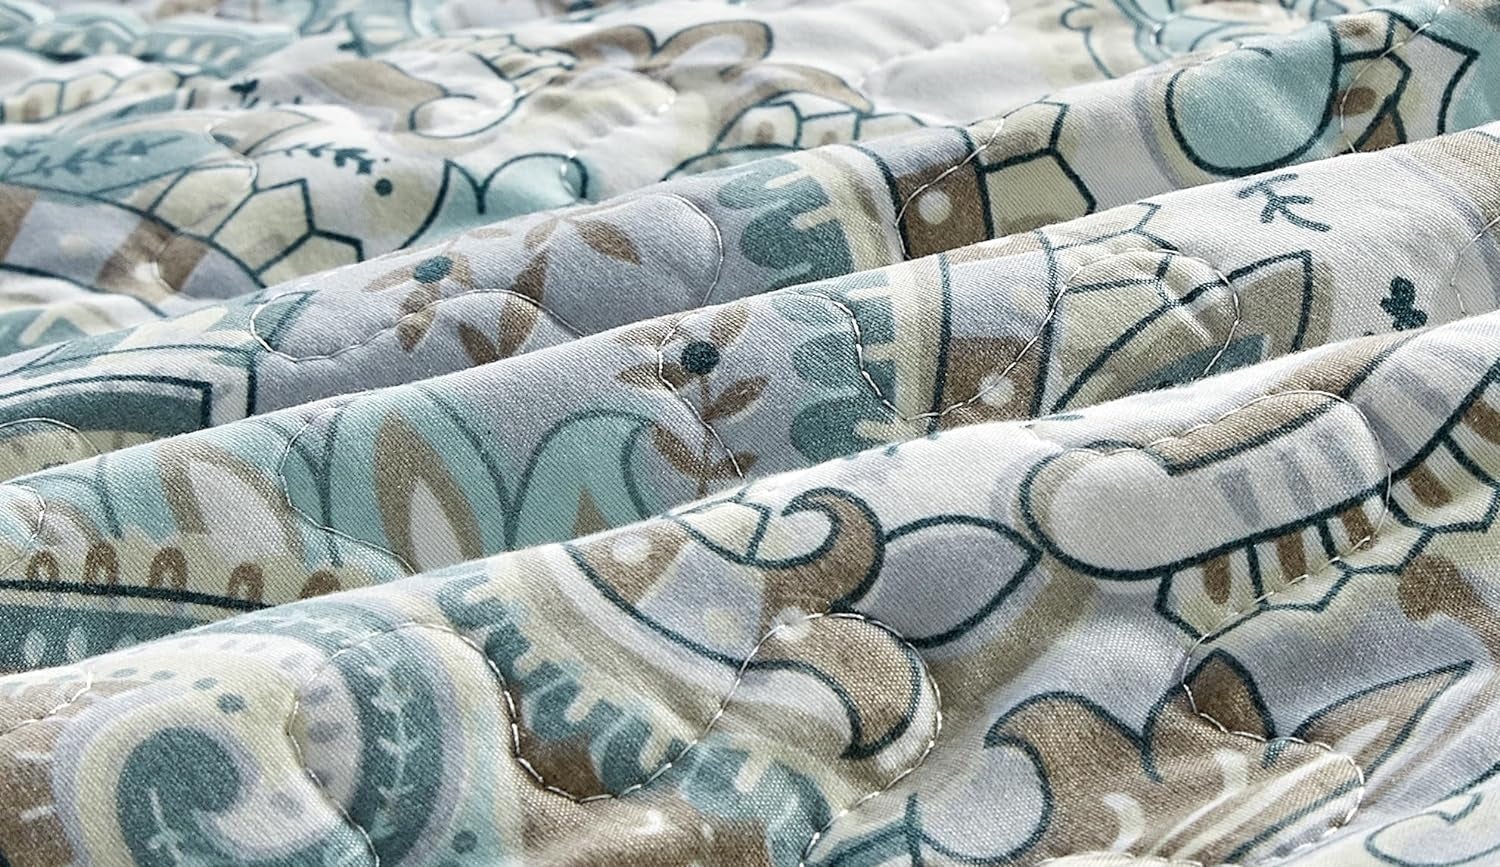 3-Piece Fine Printed Oversize (100" X 95") Quilt Set Reversible Bedspread Coverlet QUEEN SIZE Bed Cover (Pale Blue, Grey, Paisley)